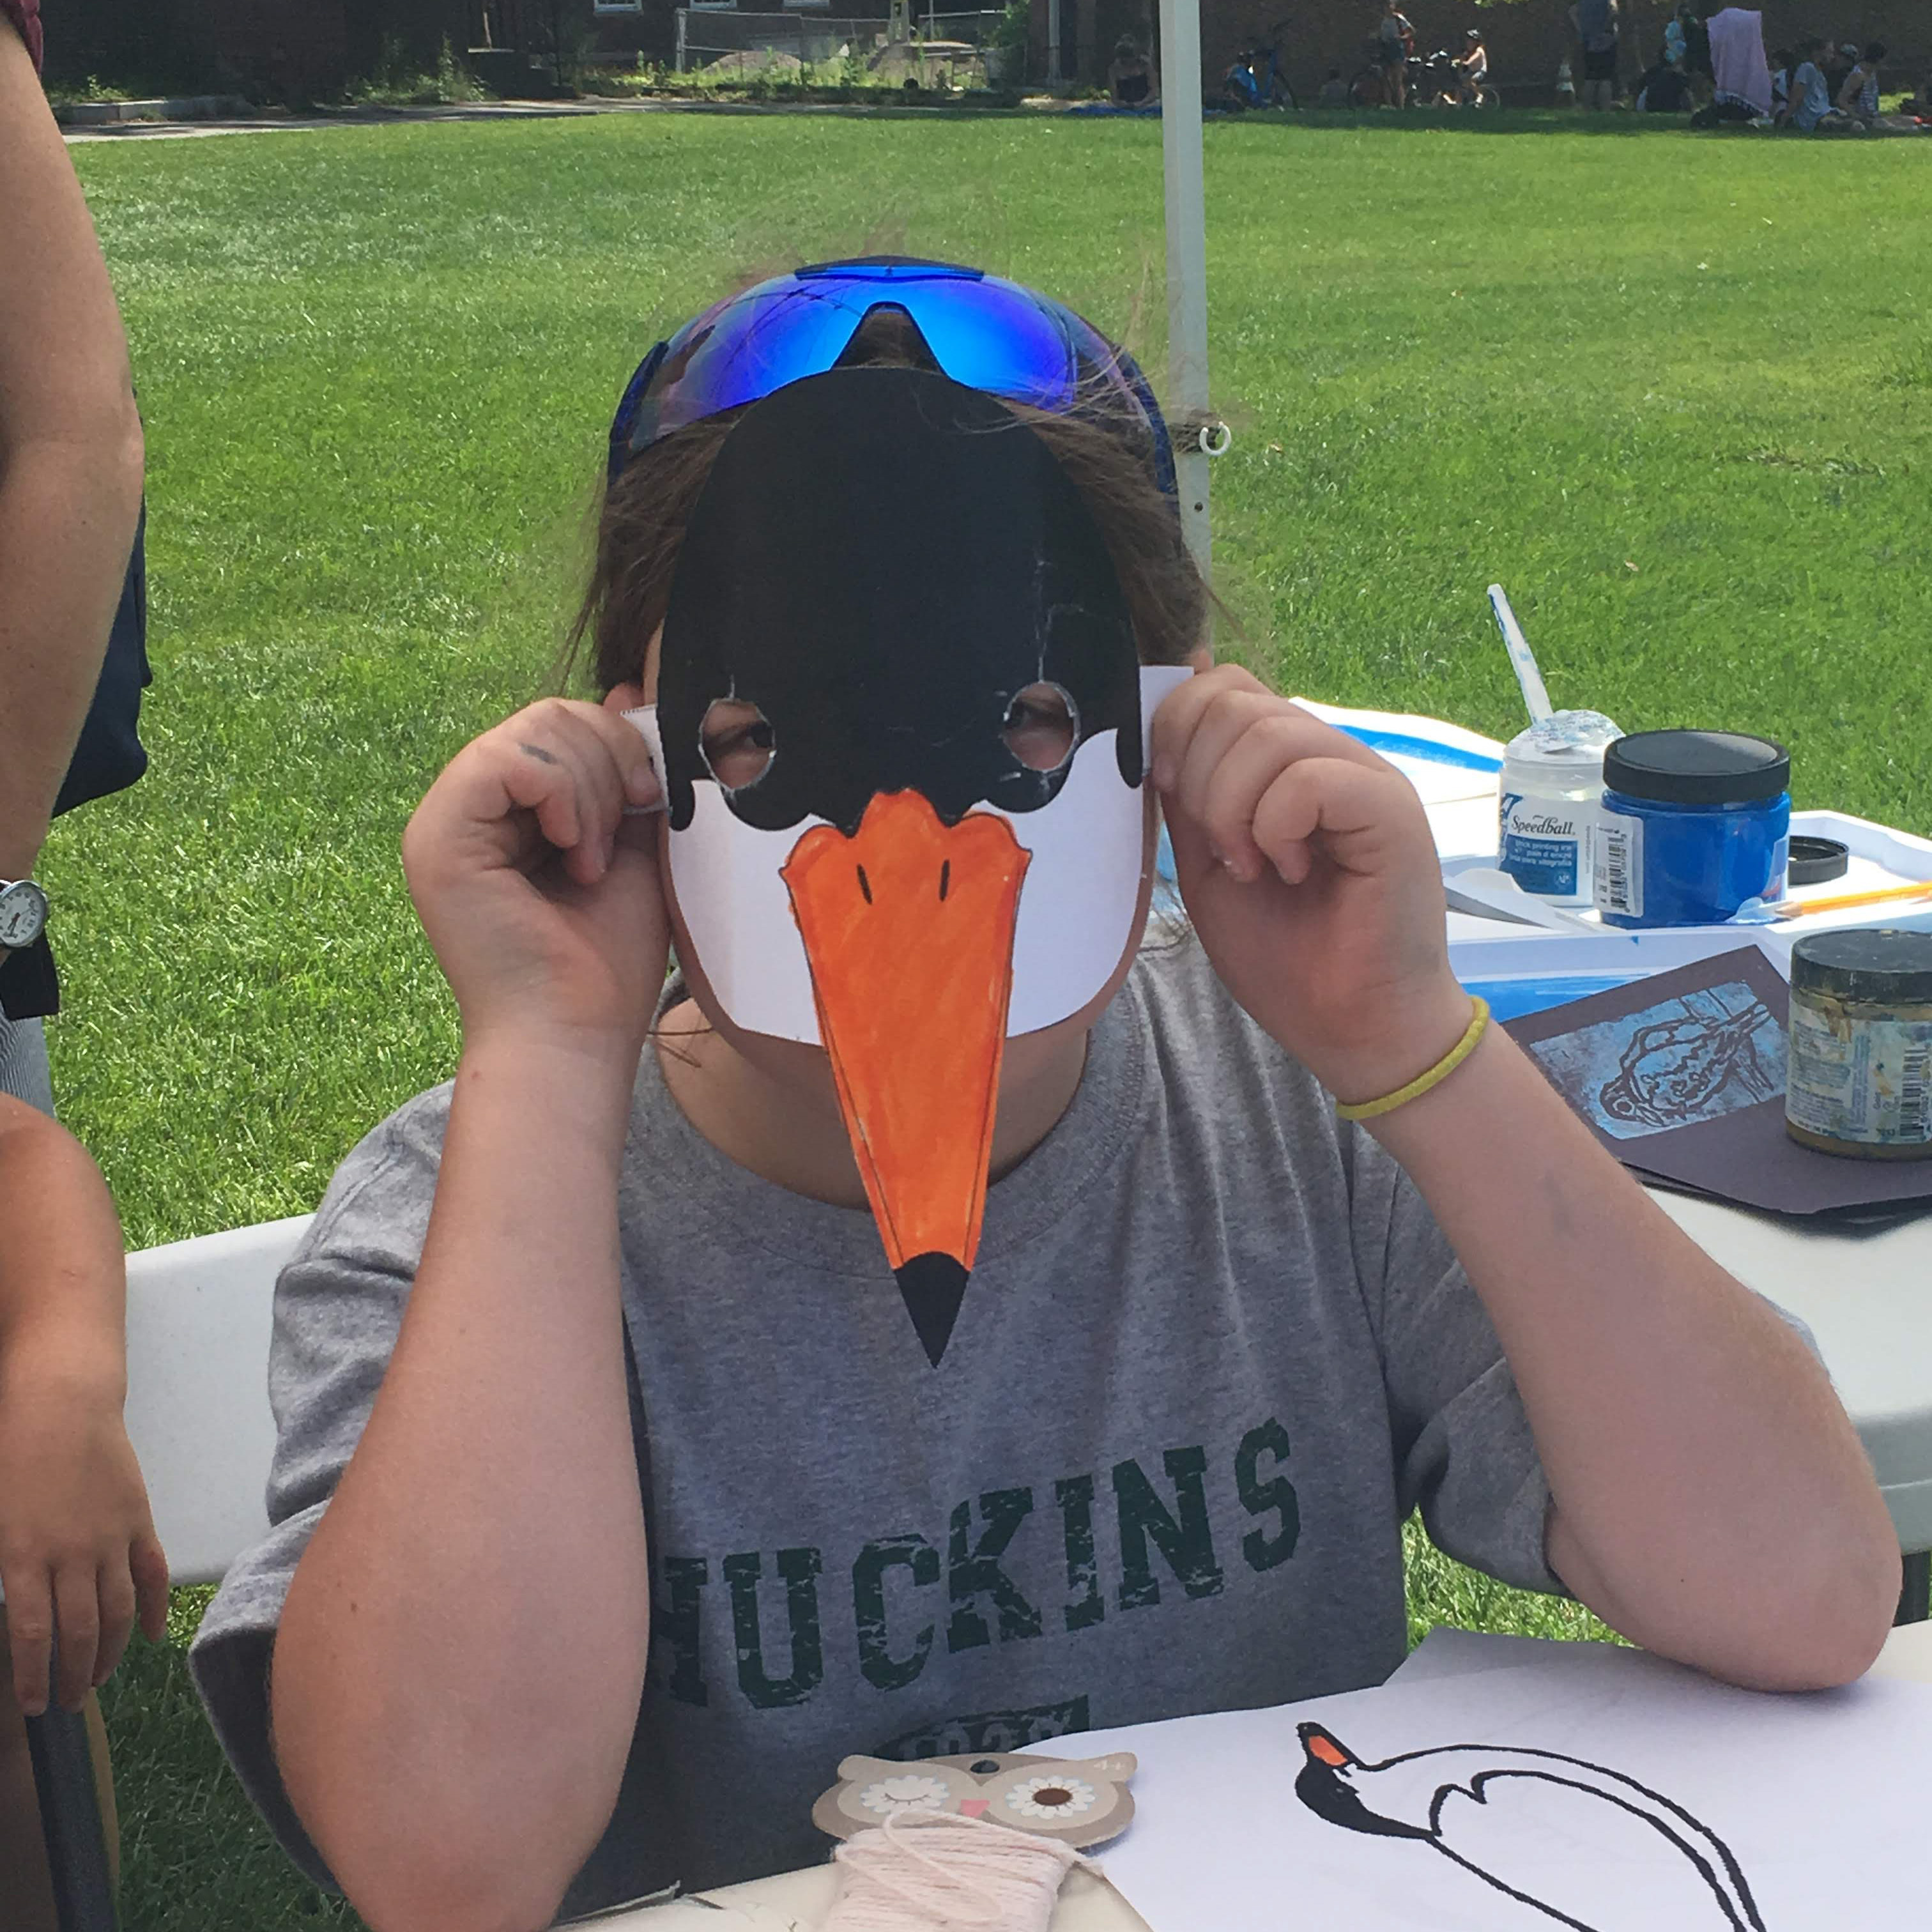 A visitor to Governors Island shows off a Common Tern mask. Photo: NYC Audubon